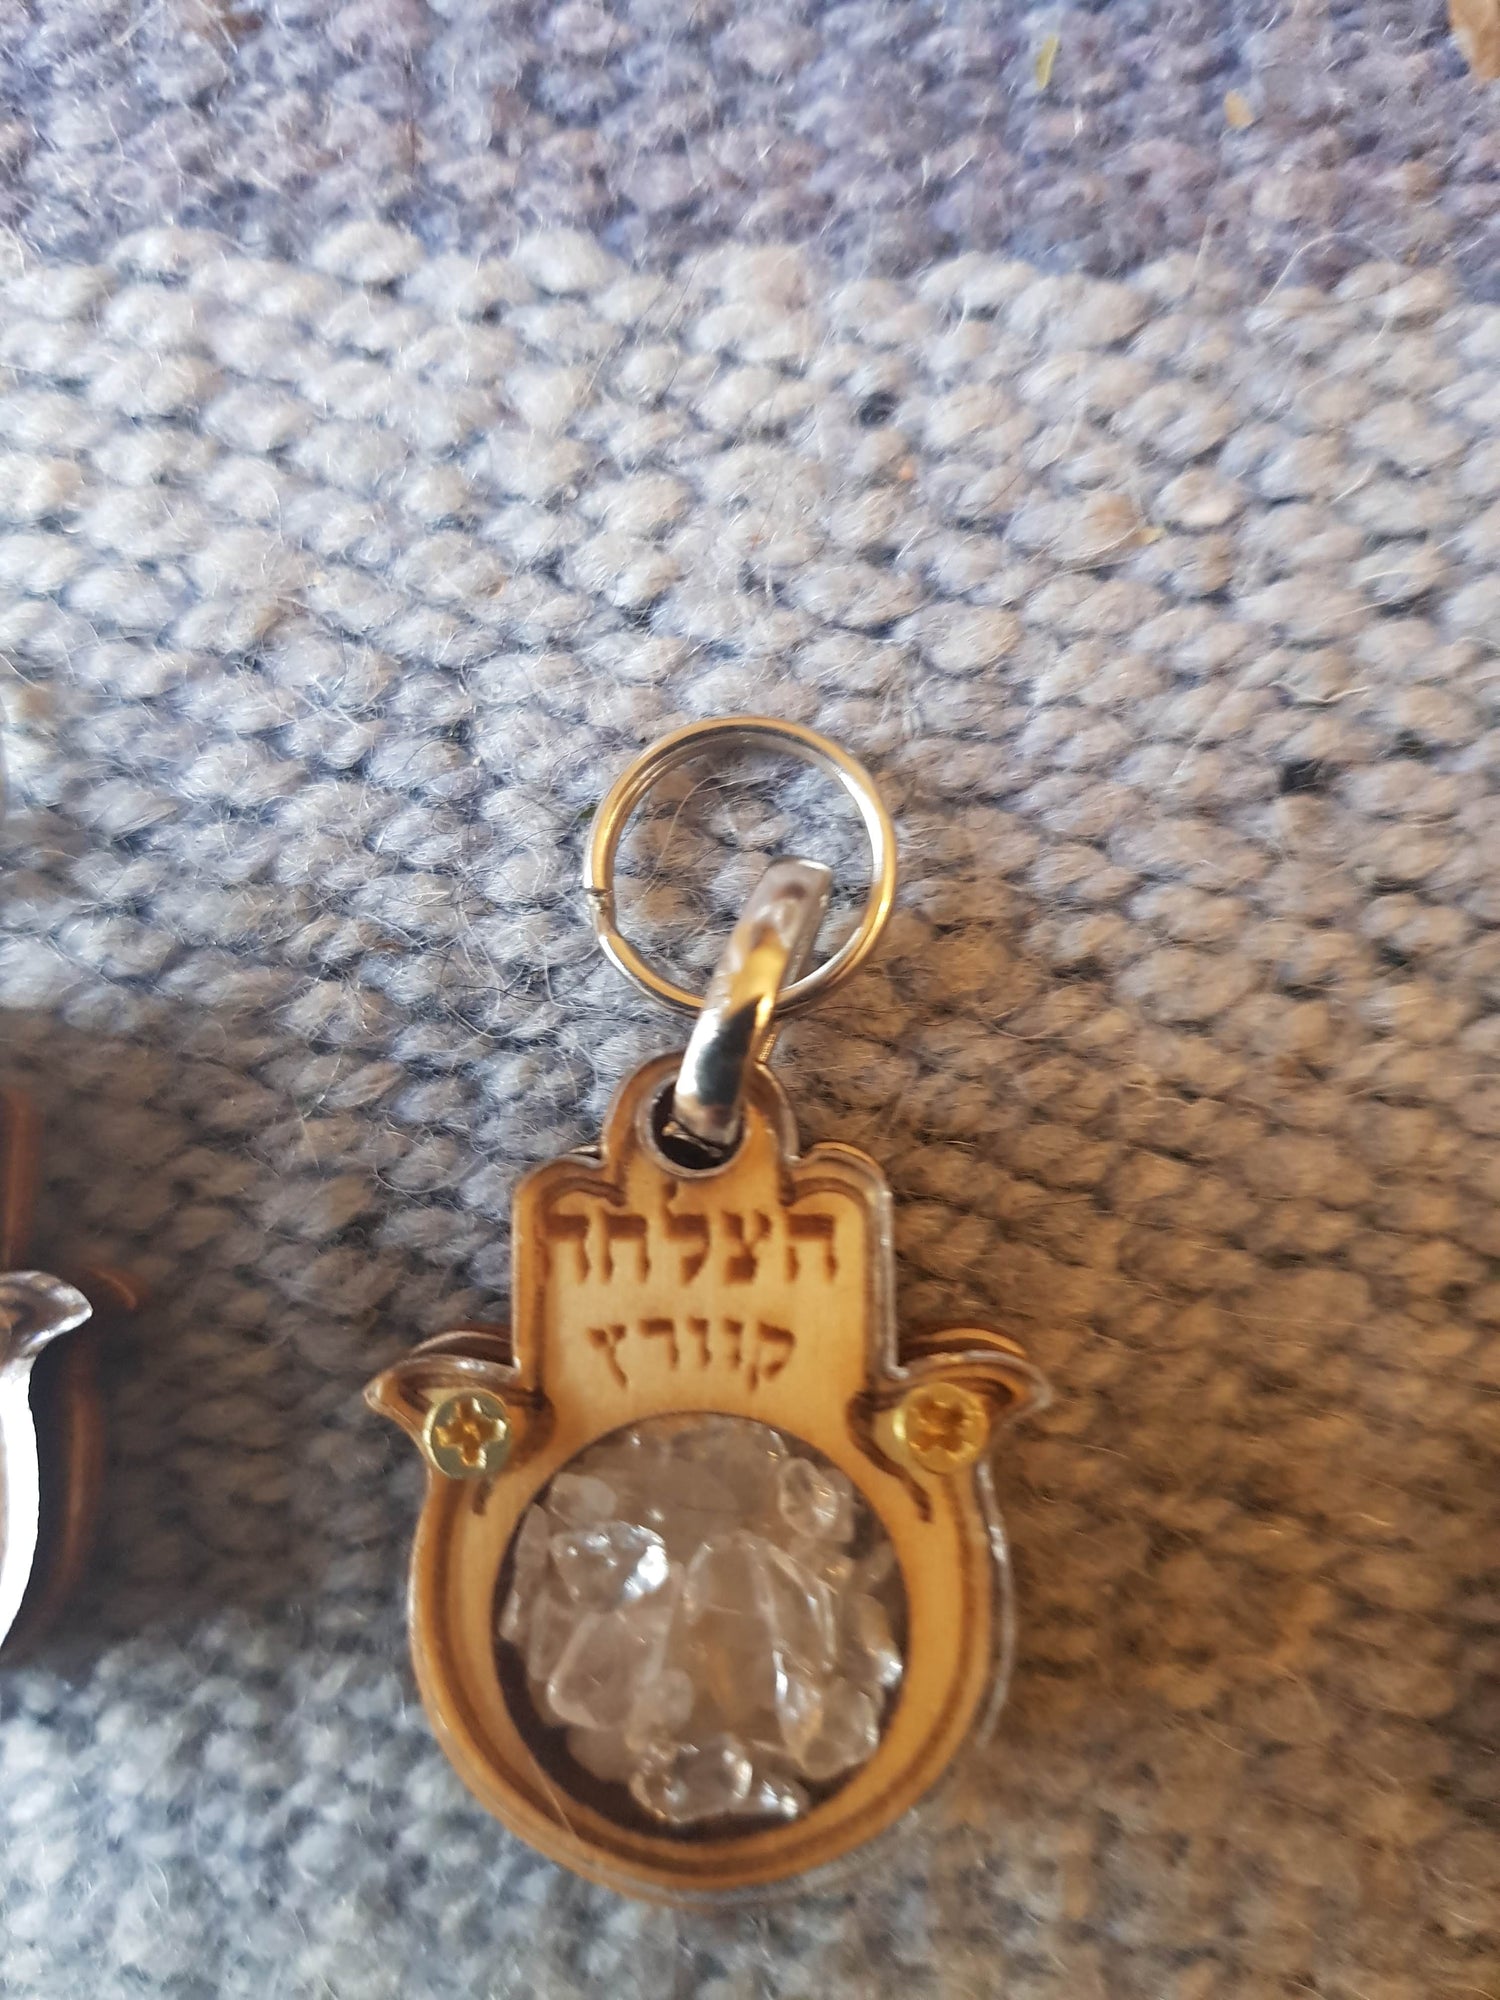 Bluenoemi Jewelry Keyholder Wood Lucky Hamsa Key Holder with Hebrew Blessings made in the Holy Land